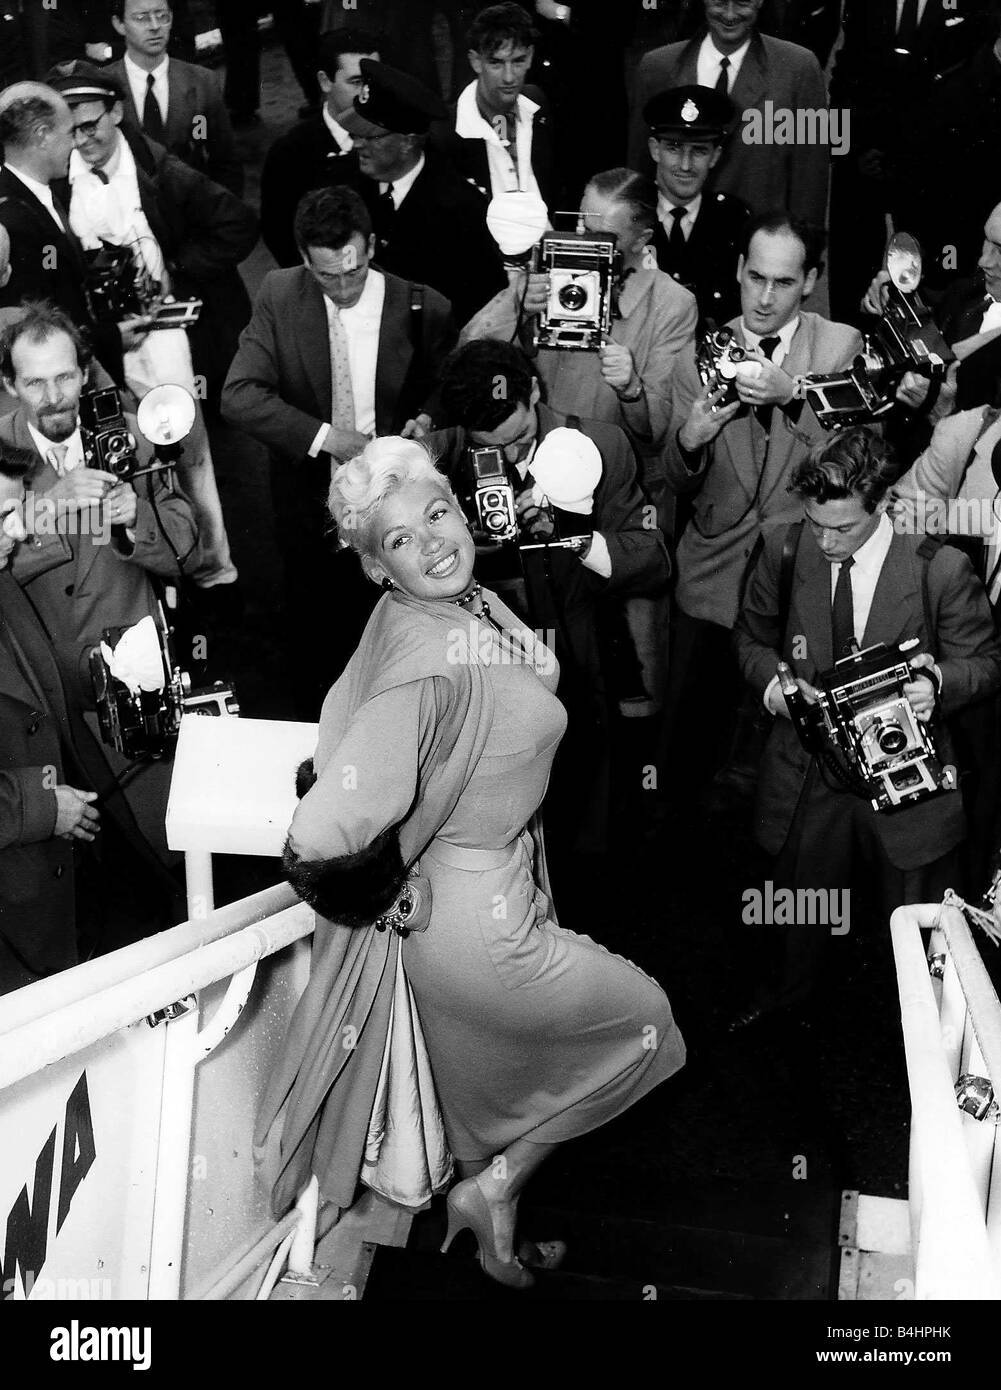 Jayne mansfield actress arriving london Black and White Stock Photos ...